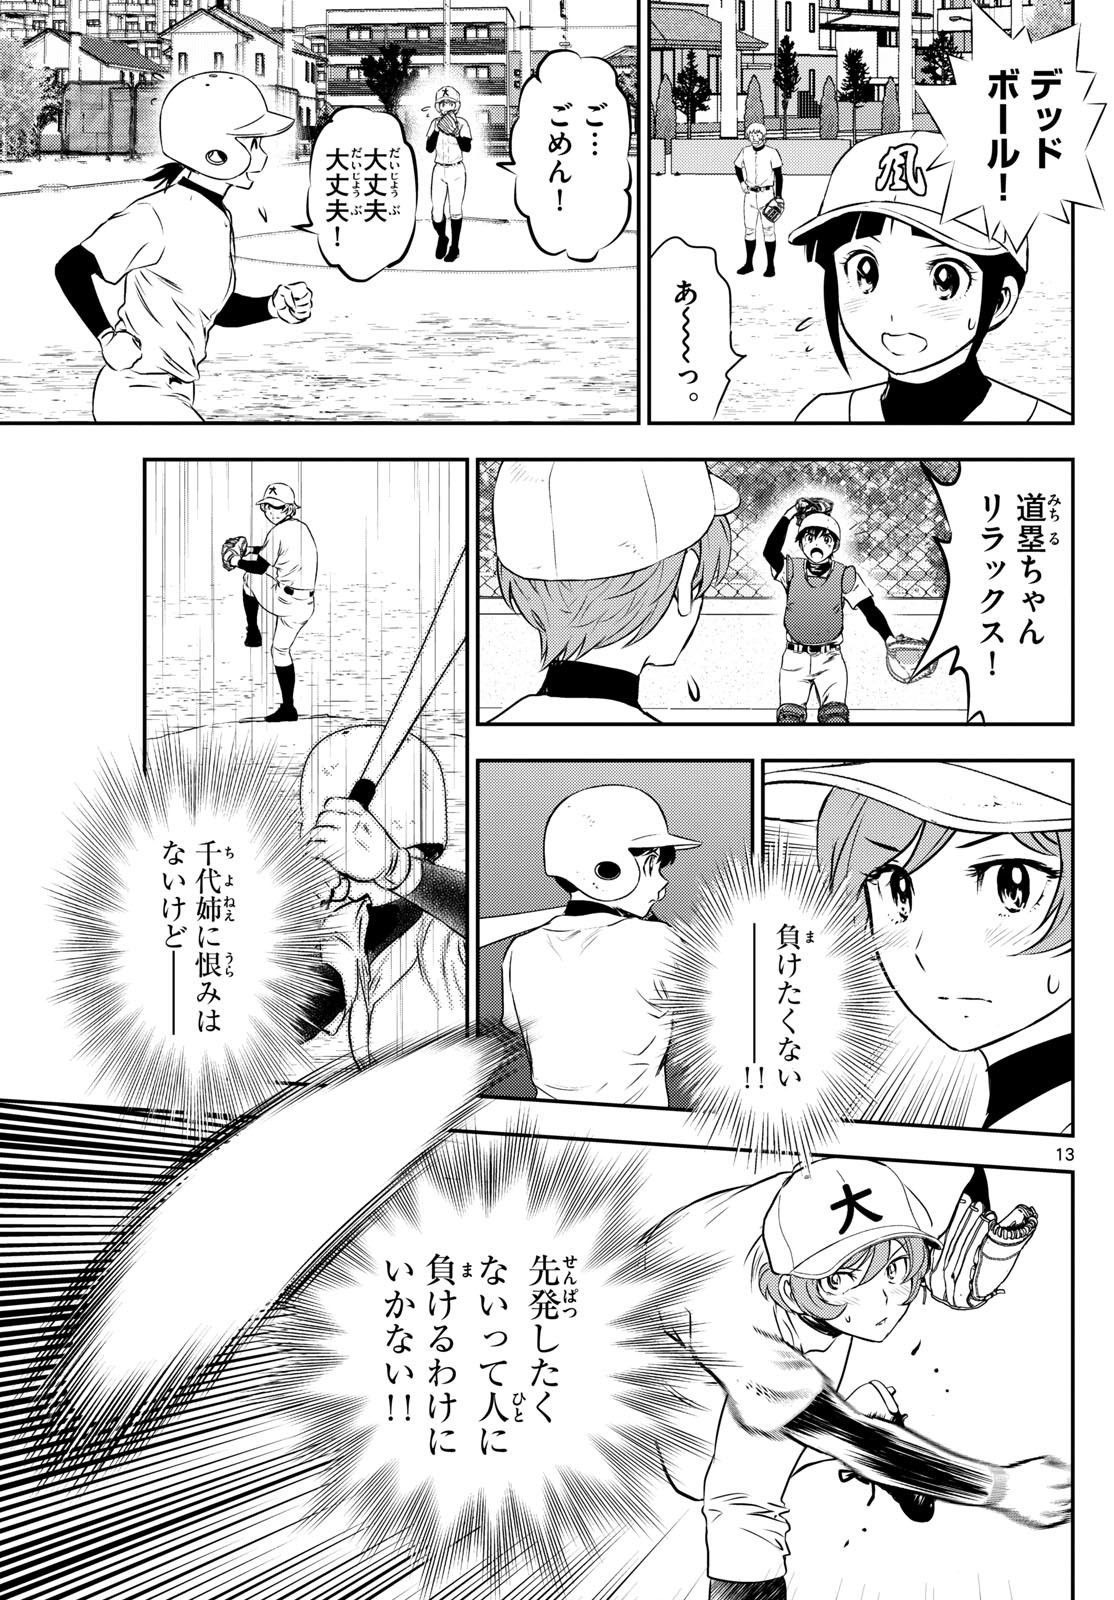 Major 2nd - メジャーセカンド - Chapter 280 - Page 13